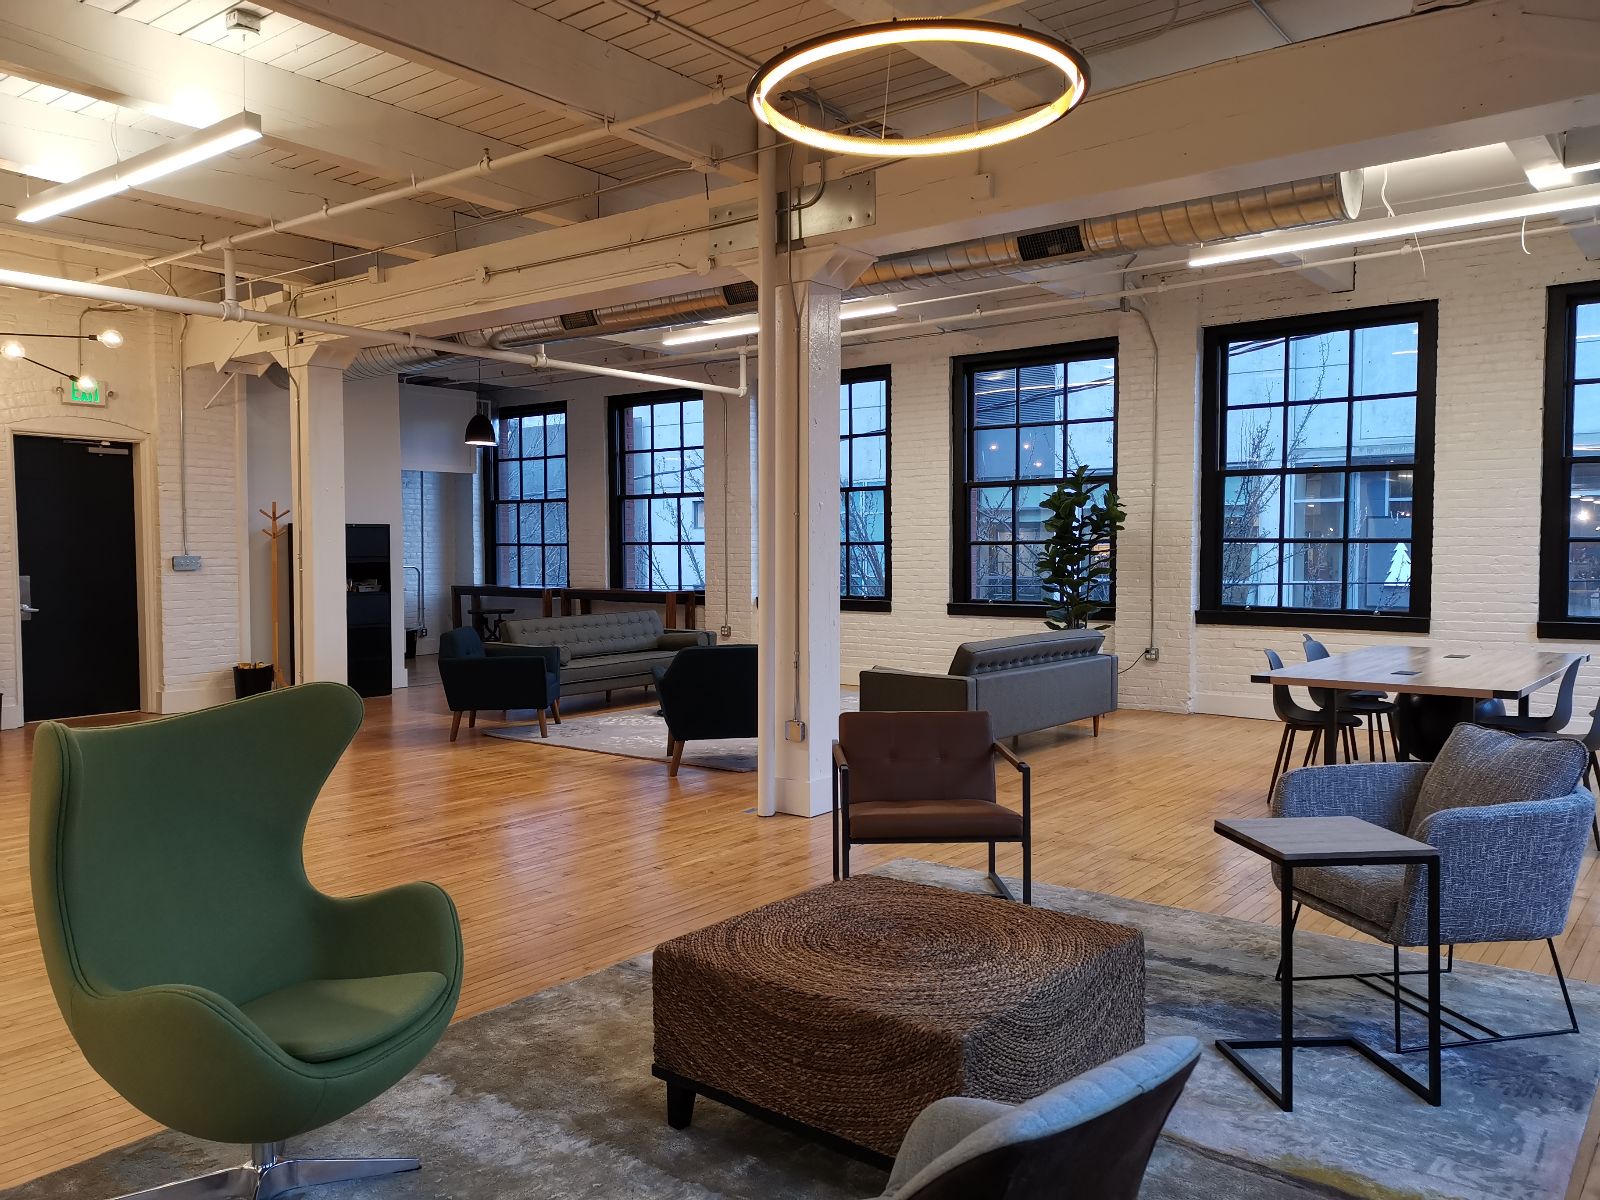 McCoy Russell Collaborative Office Space as a Lifestyle Experience